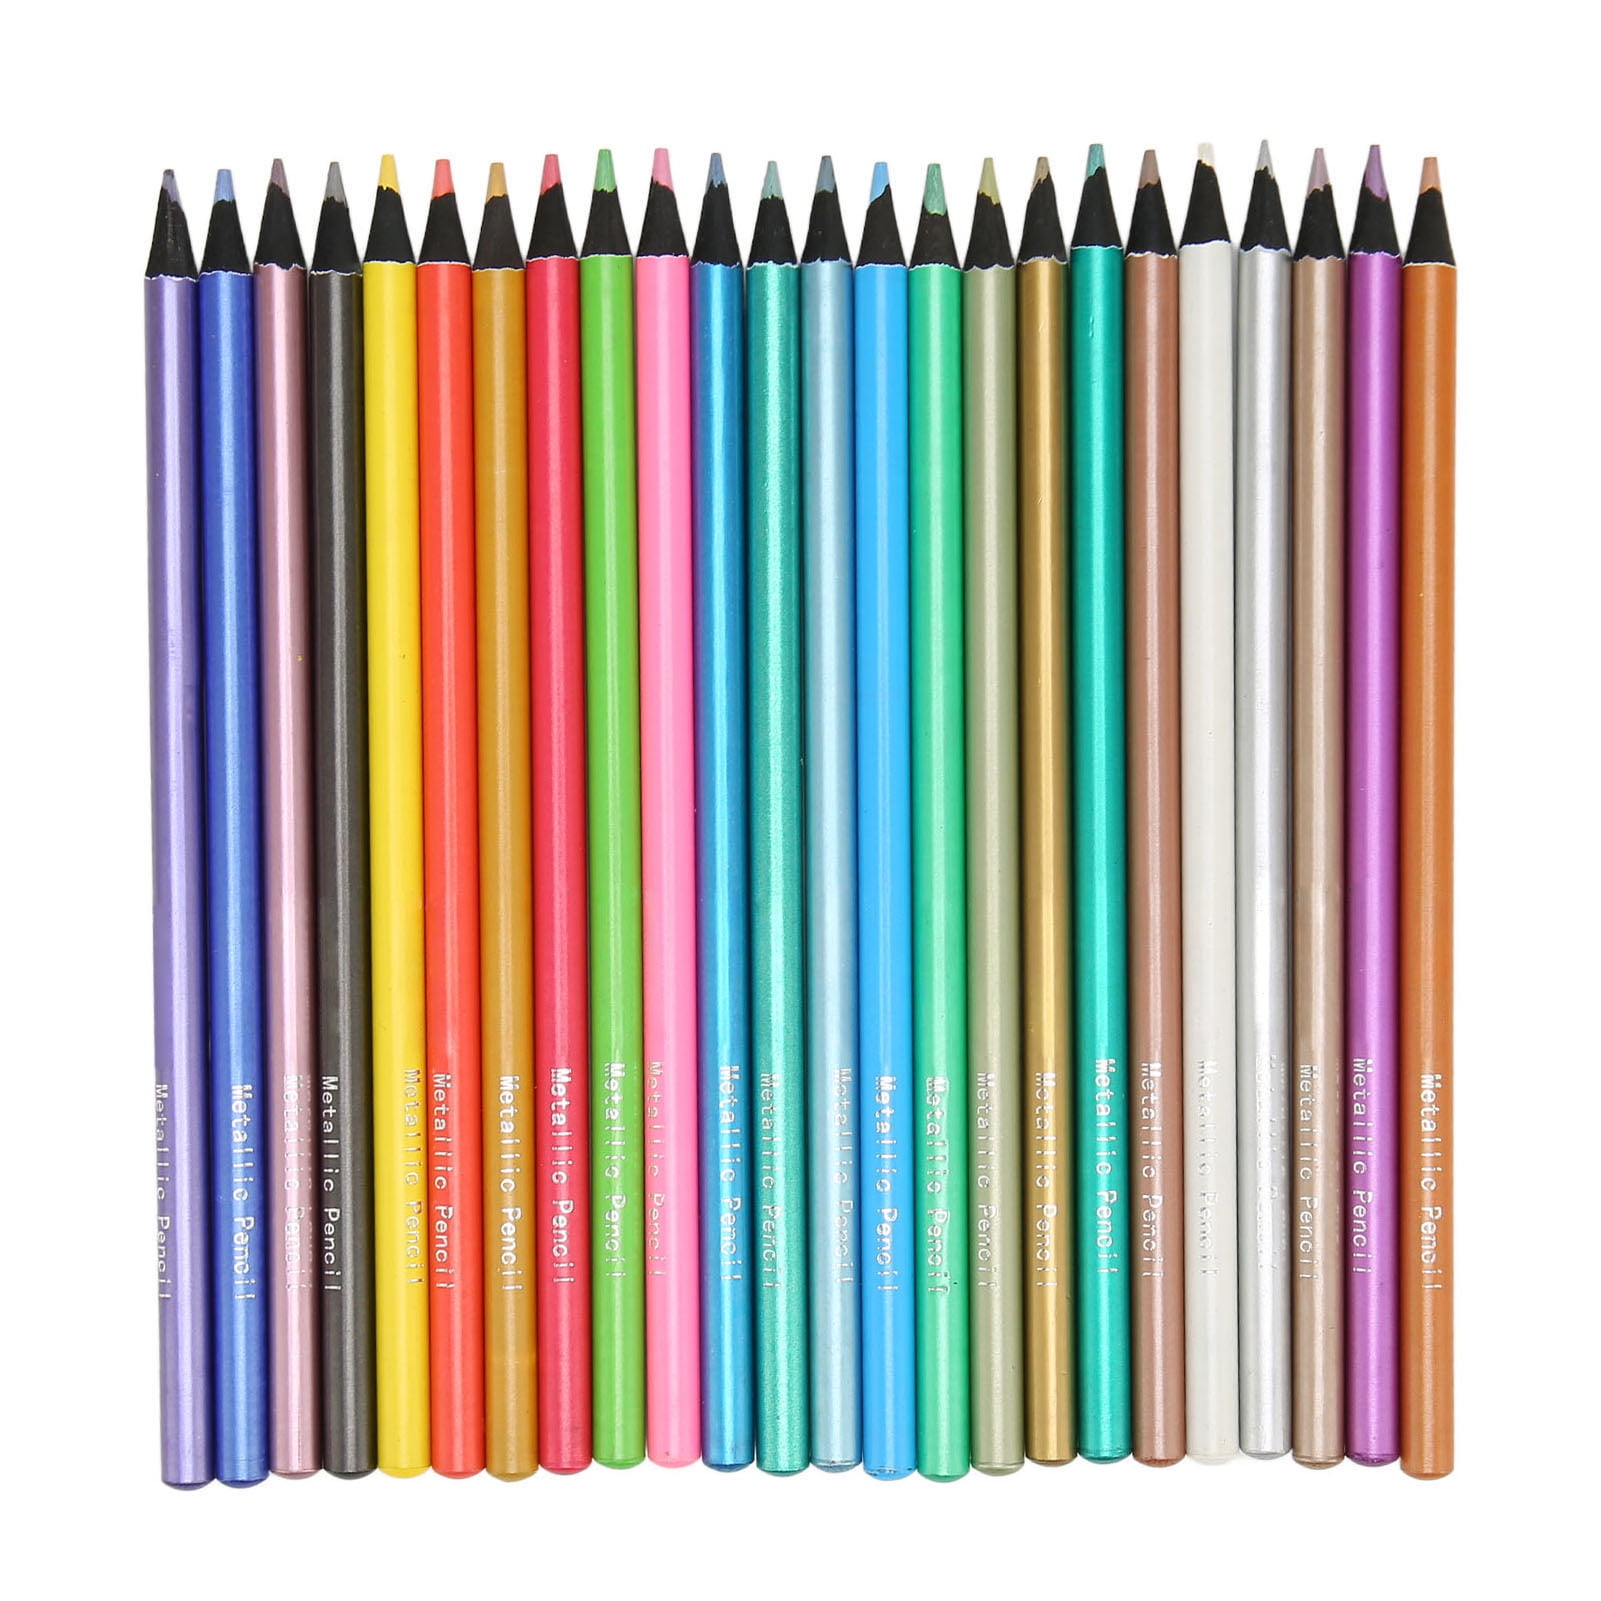 24x GRADED SHADING PENCILS Dark/Light Tone Blending Picture Drawing Graphite